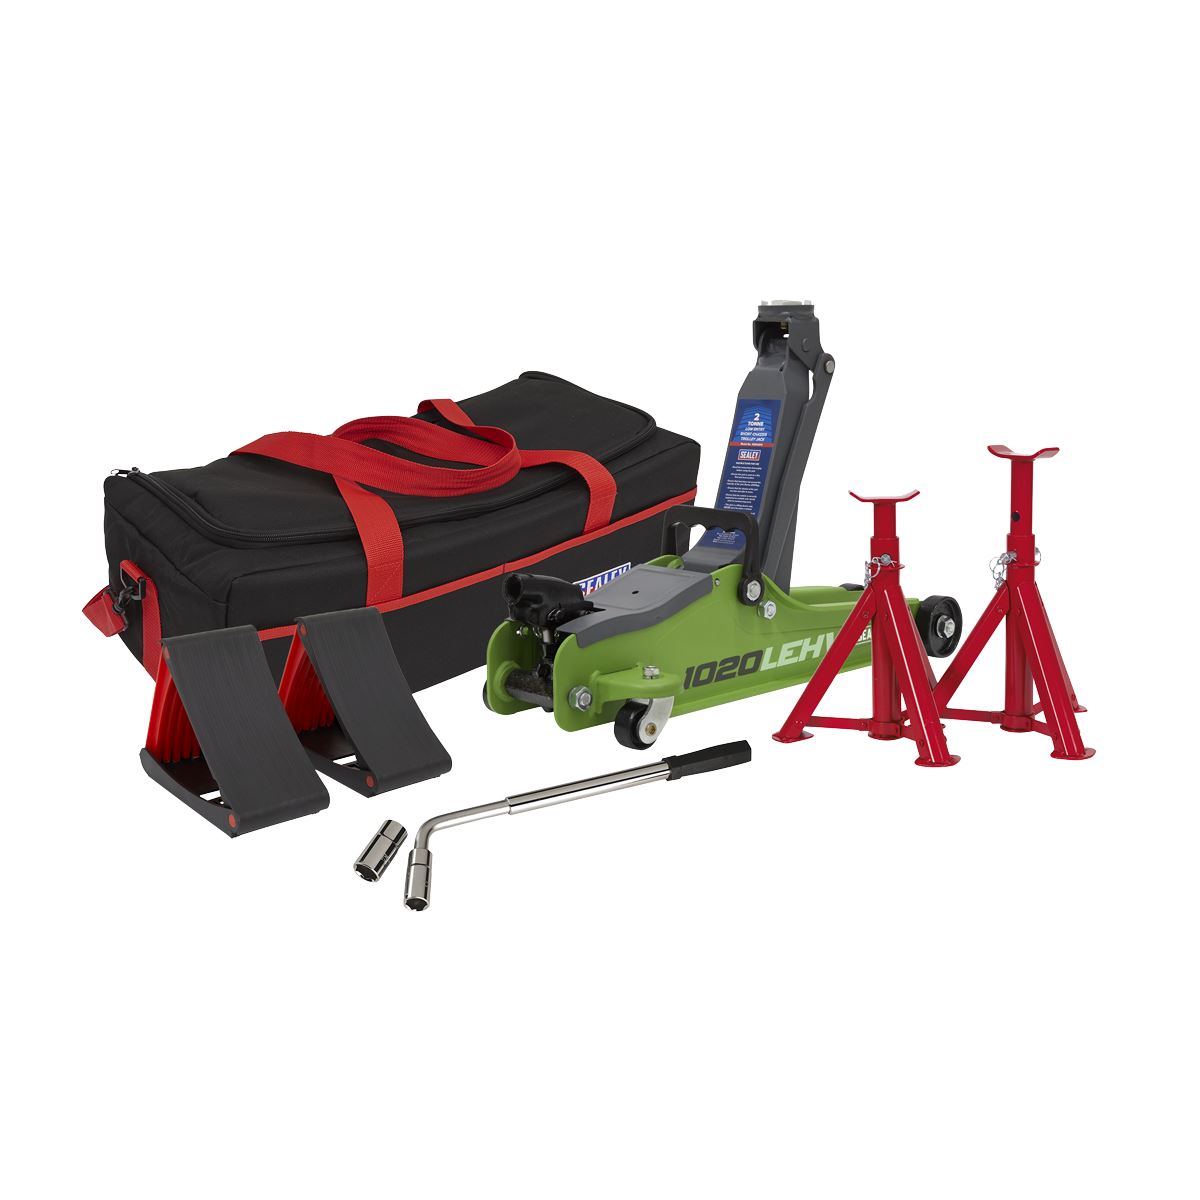 Sealey Trolley Jack 2 Tonne Low Entry Short Chassis & Accessories Bag Combo - Hi-Vis Green